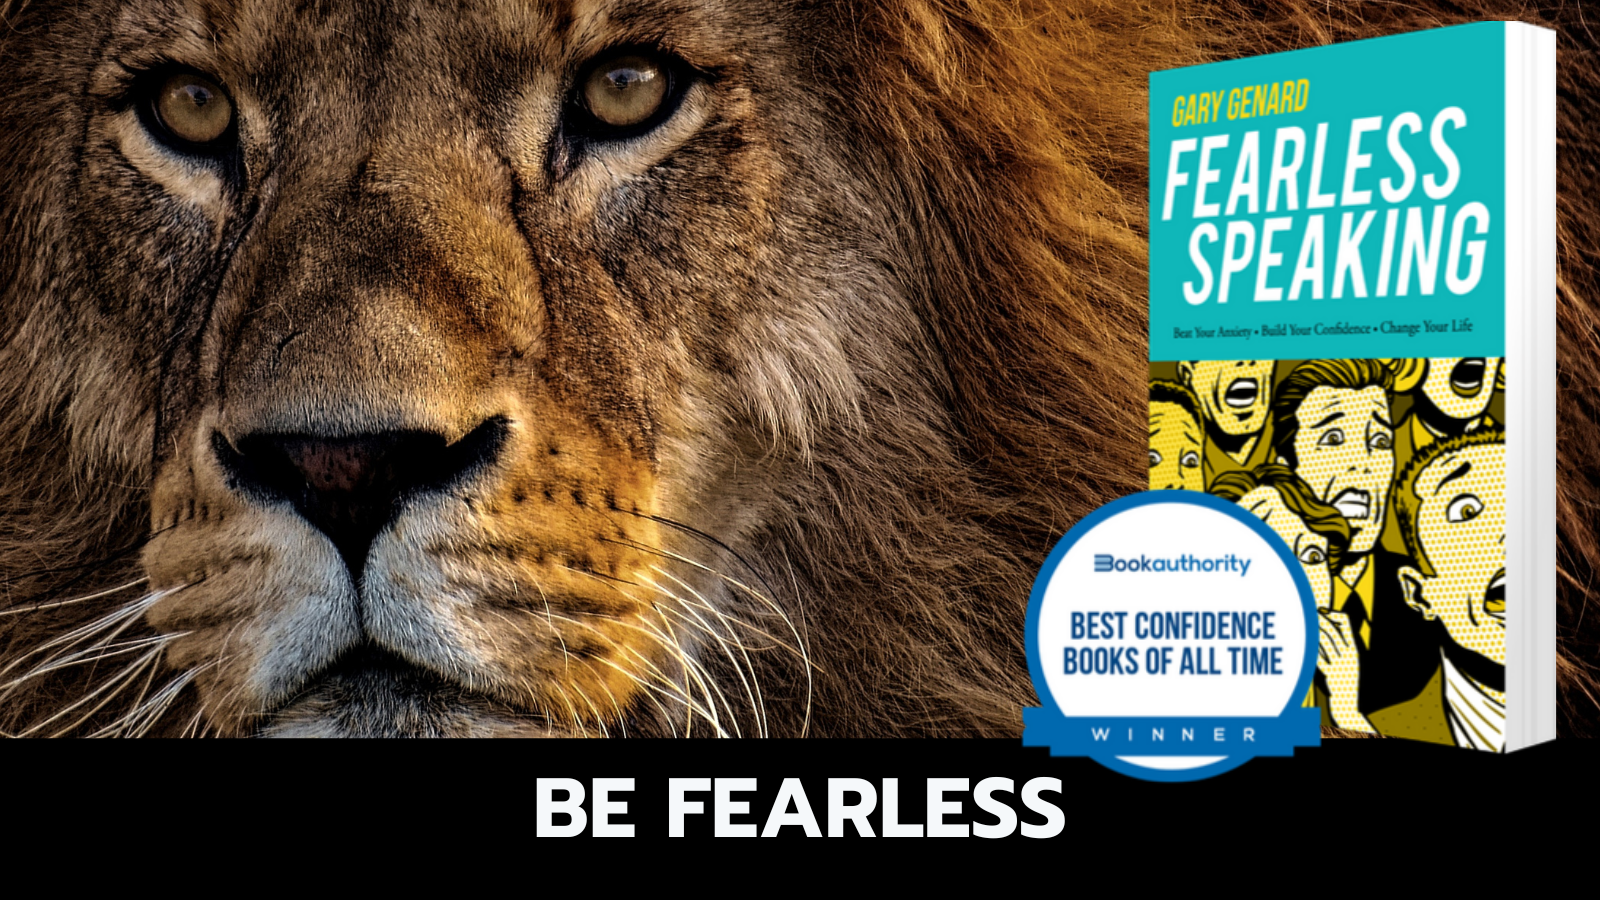 Learn how to breathe to overcome speech anxiety. Get Dr. Gary Genard's book, Fearless Speaking.